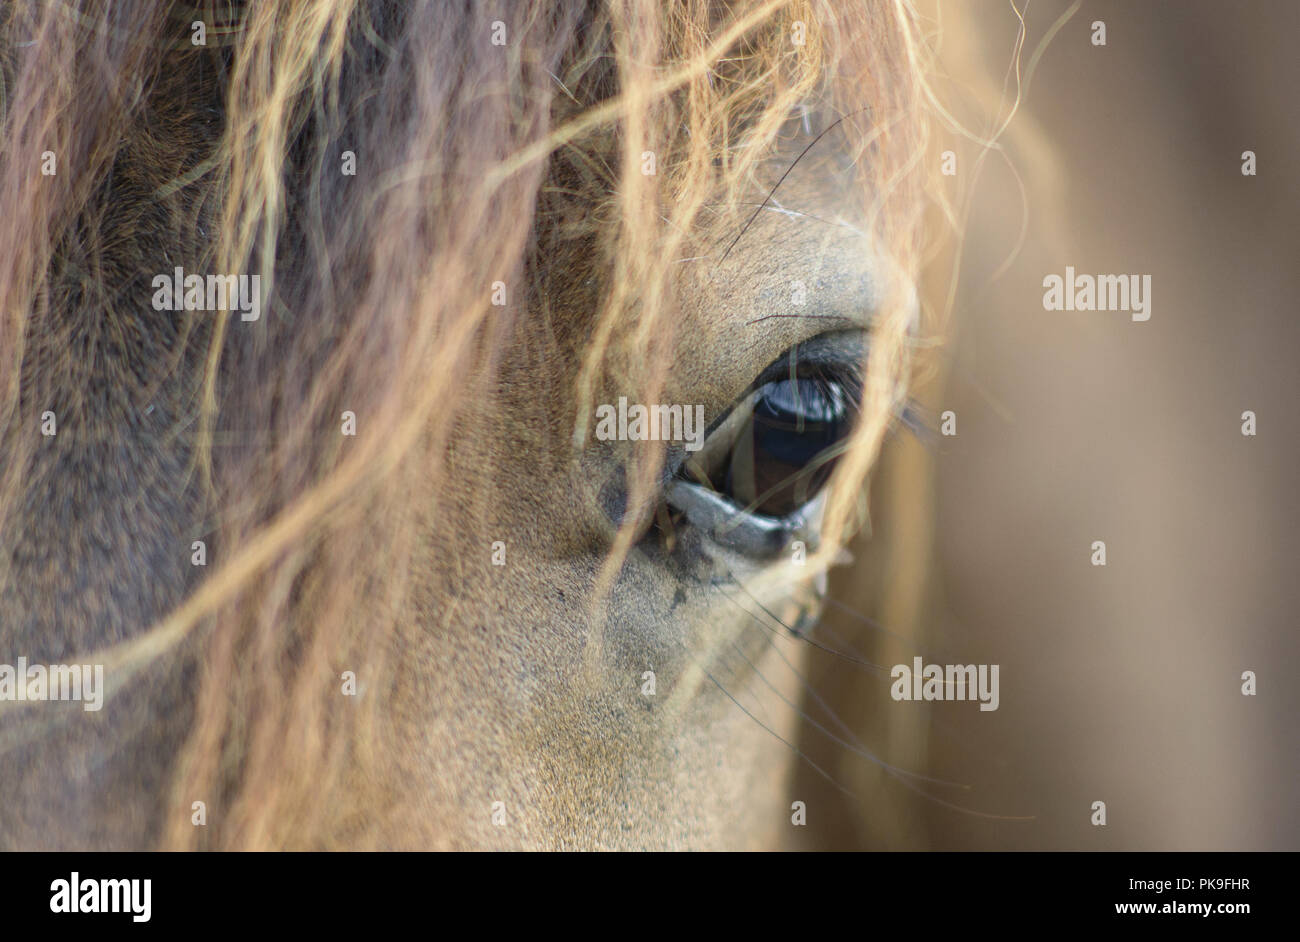 horse with flies in the eyes disturbing him Stock Photo